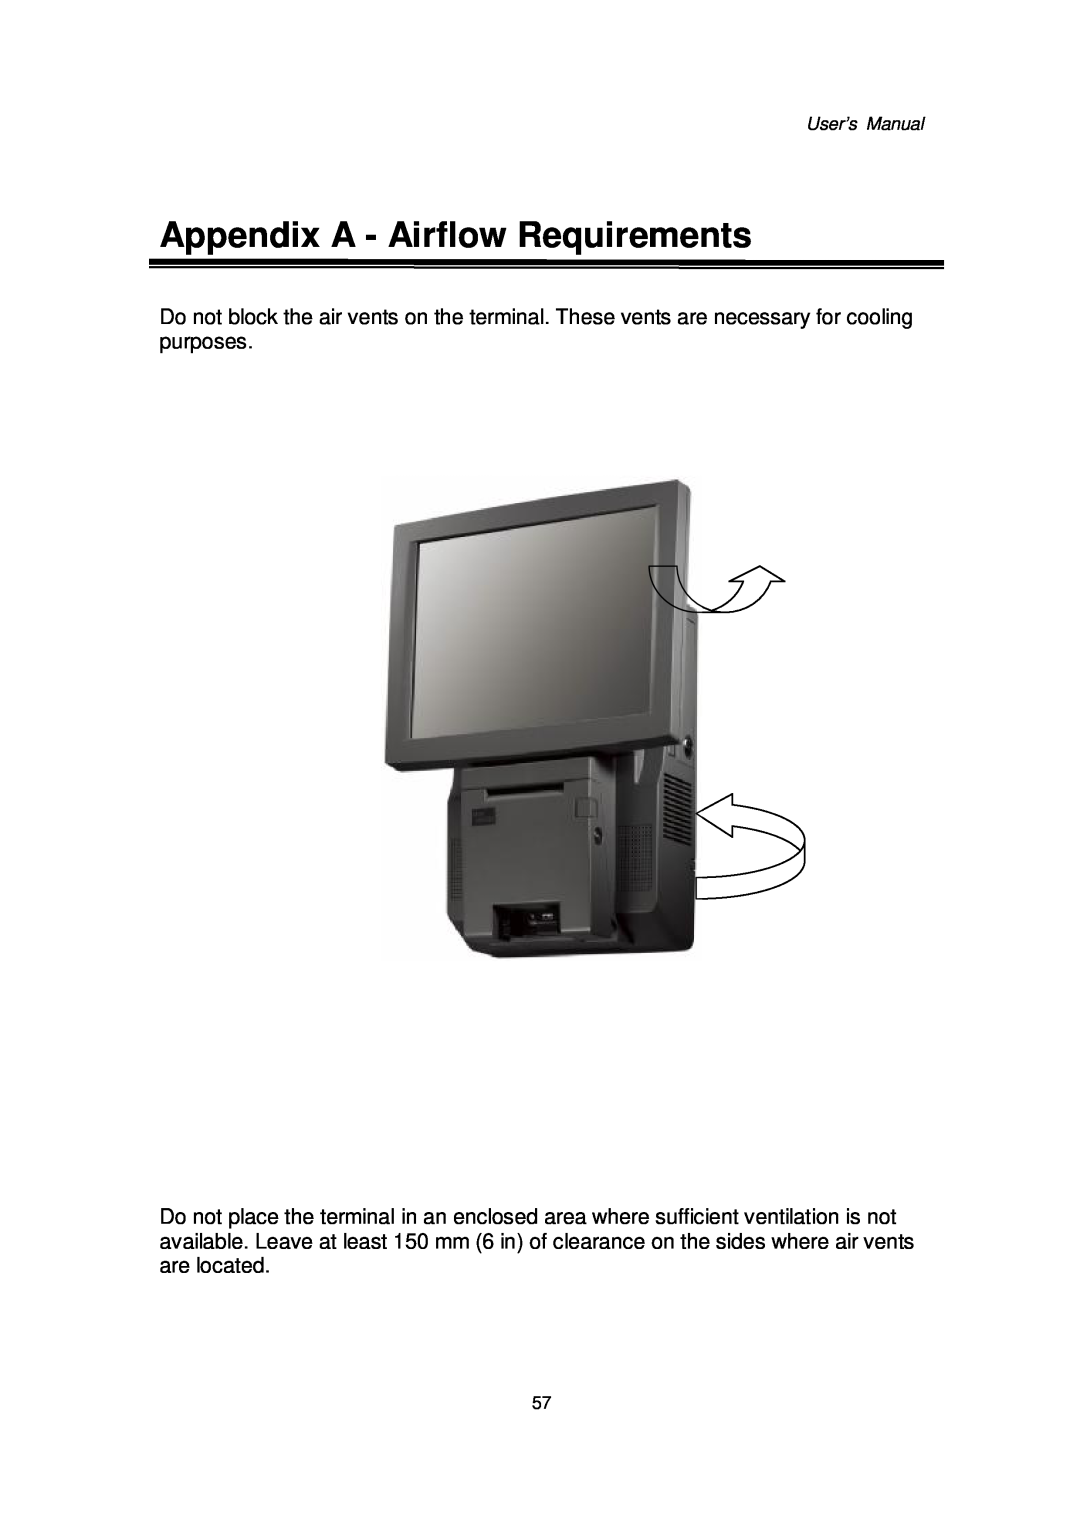 Intel Kiosk Hardware System, 48201201 user manual Appendix A - Airflow Requirements 